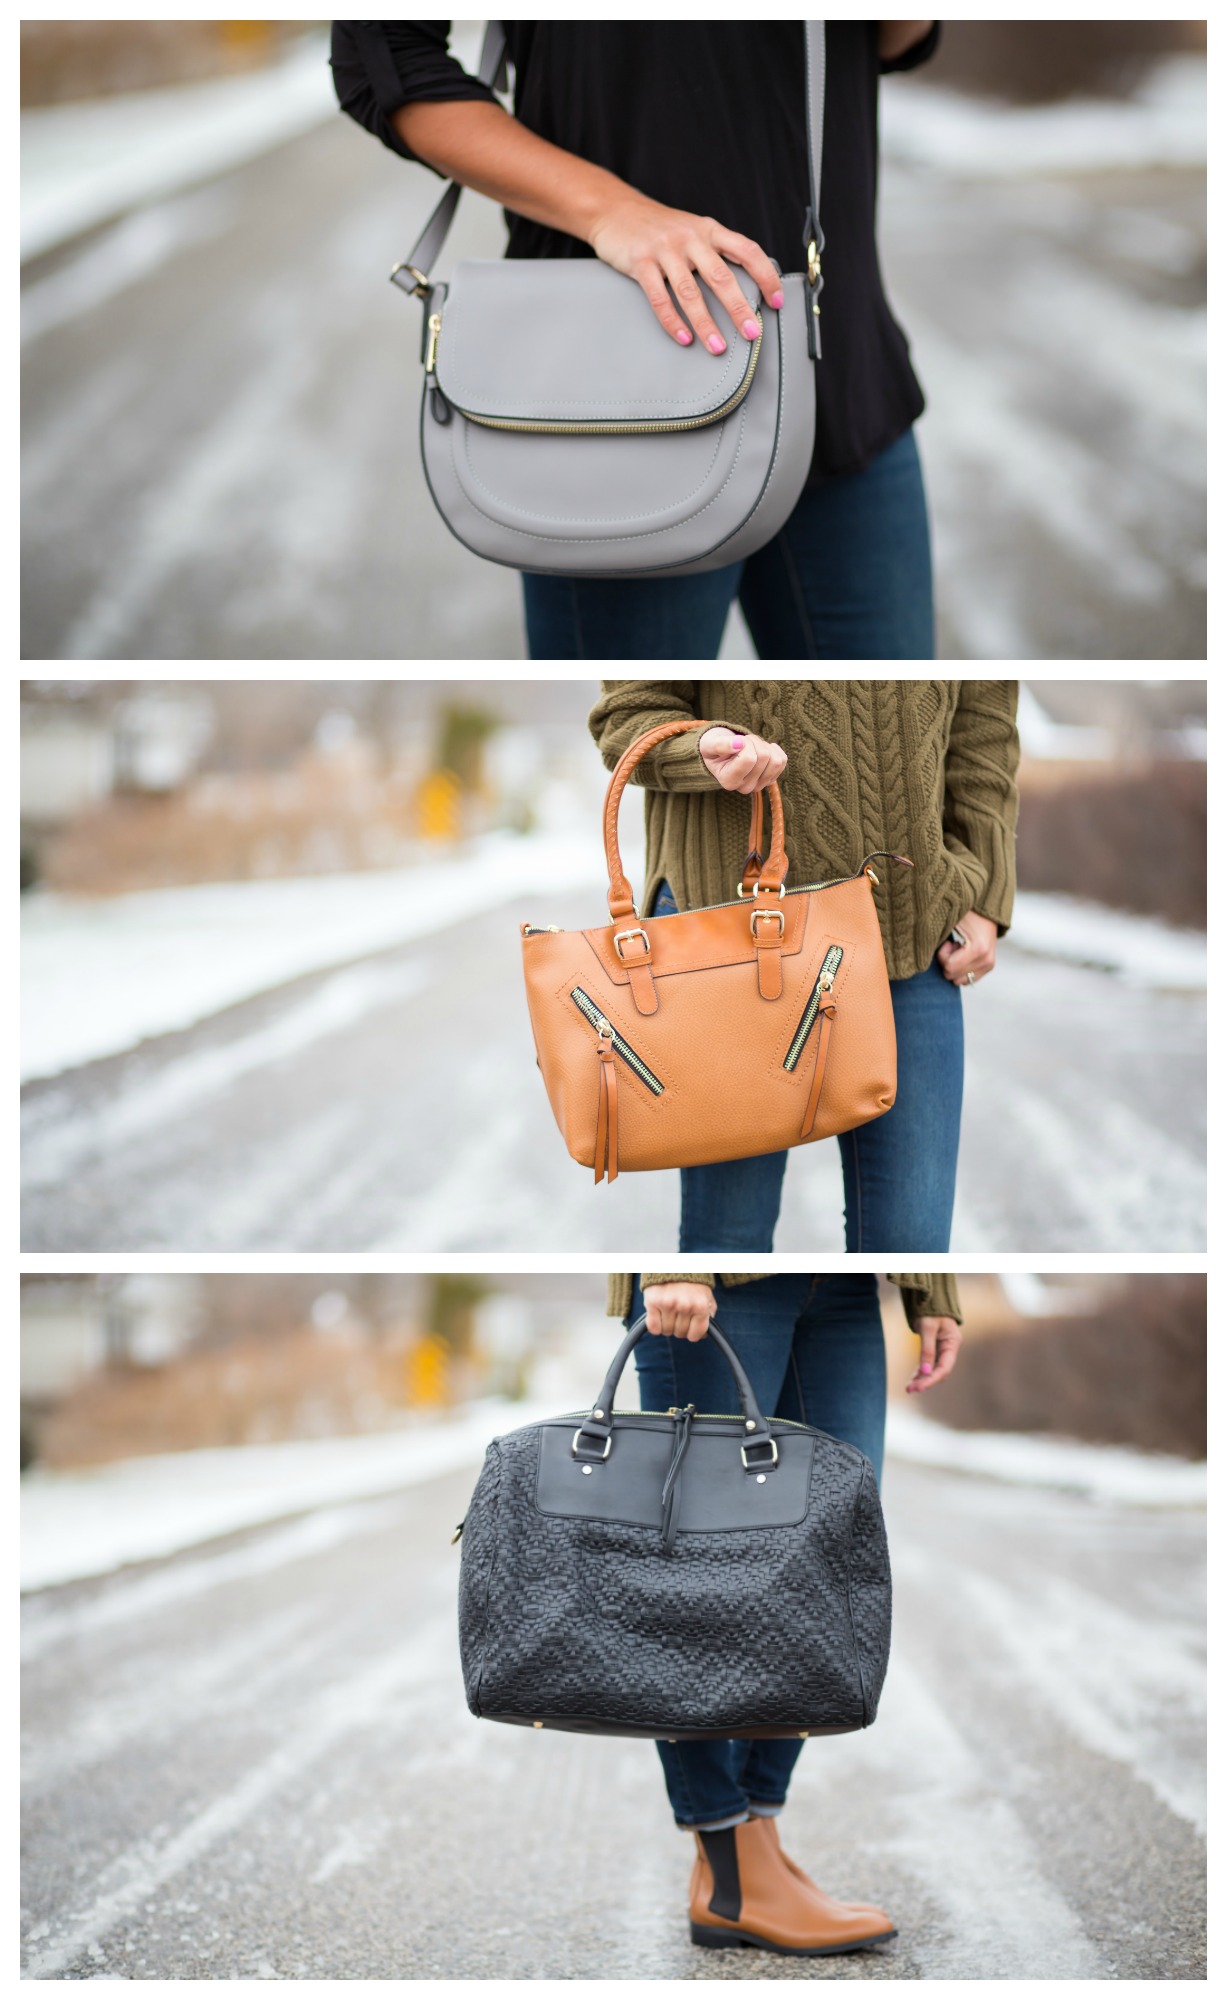 Inspired By  Bags, My style, Handbag heaven